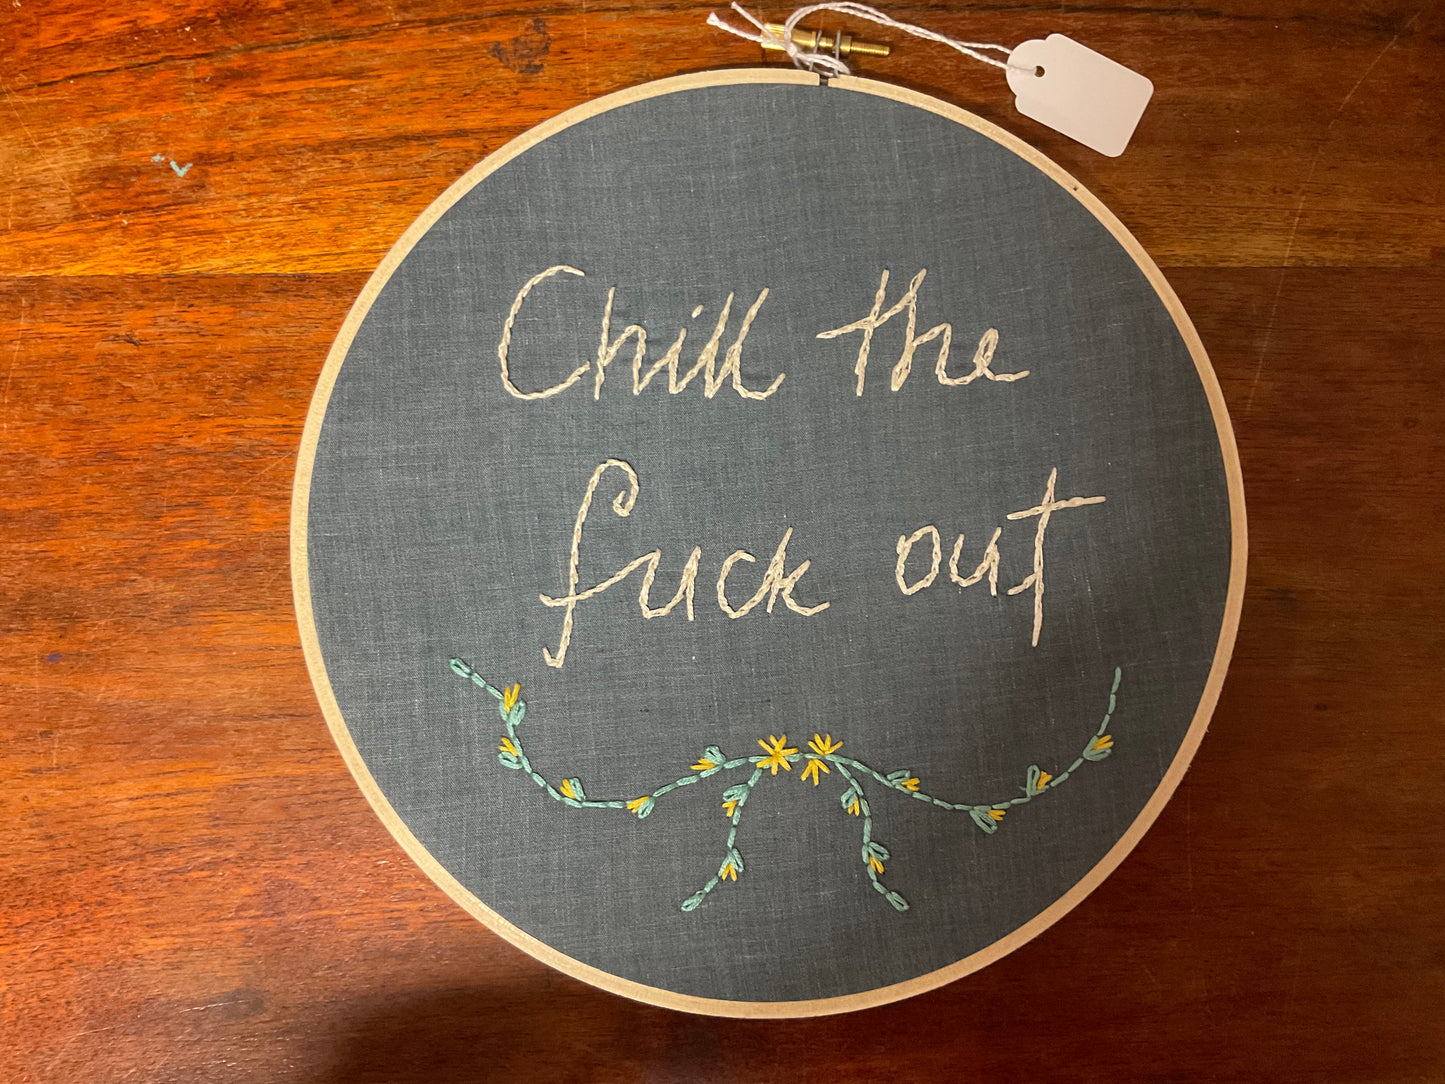 Naughty Corner Embroidery - Chill the F*ck Out 20cm